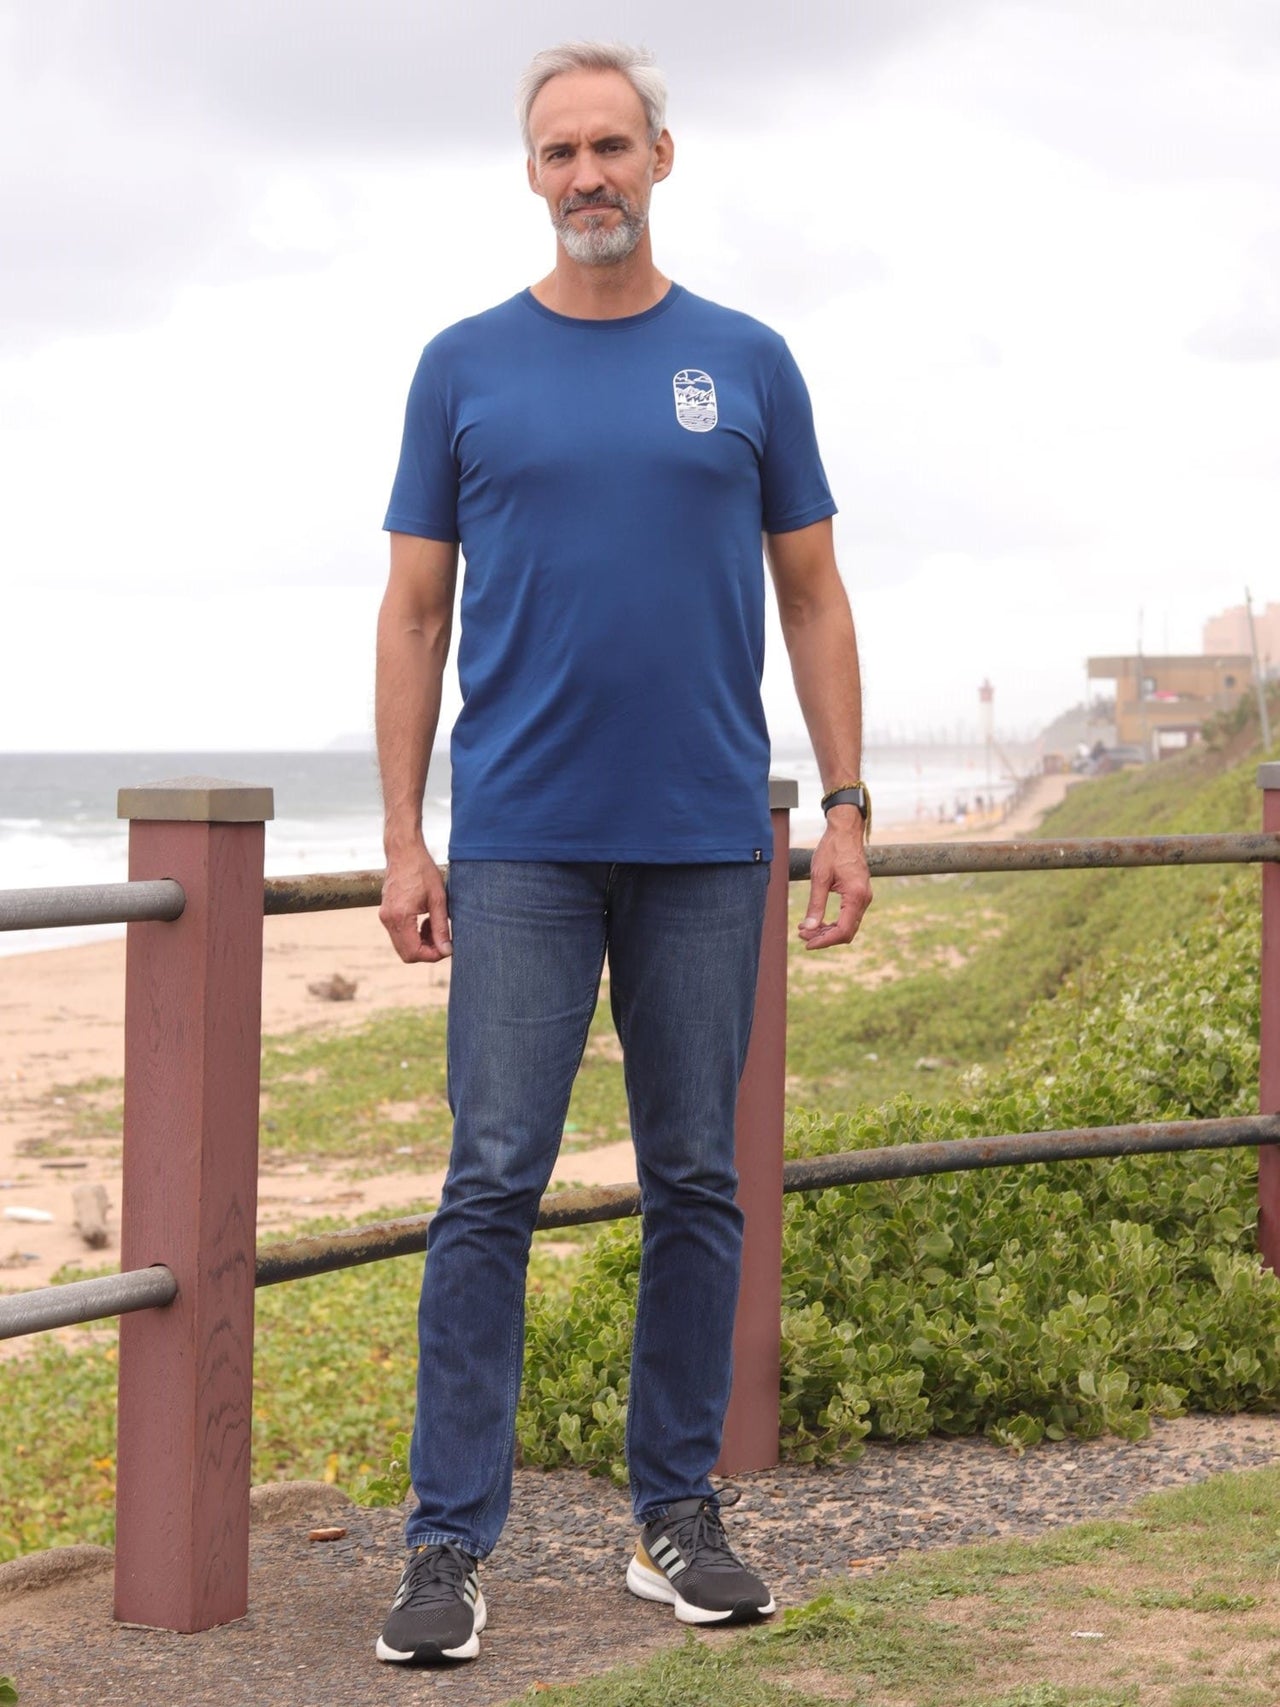 A head to toe shot of a tall slim guy in an L tall graphic t-shirt with a lake design.